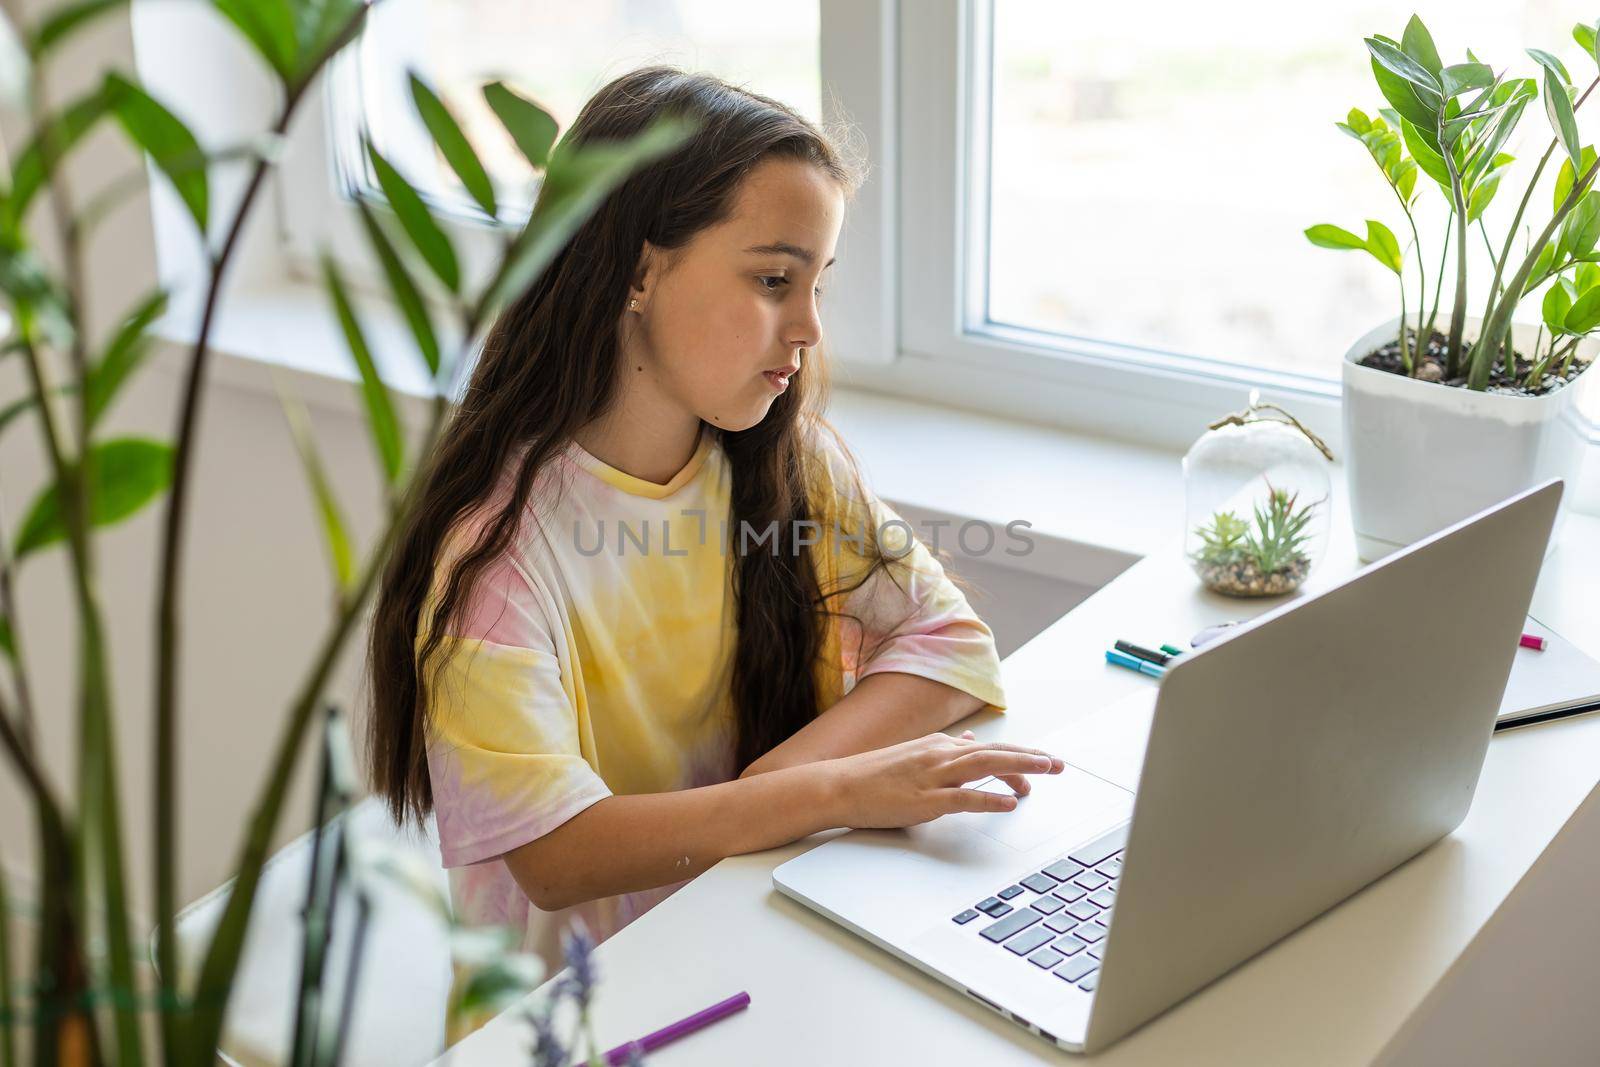 Excited Teen Girl Sitting In Living Room With Laptop, During Webinar At Home. Online School Tests Concept.